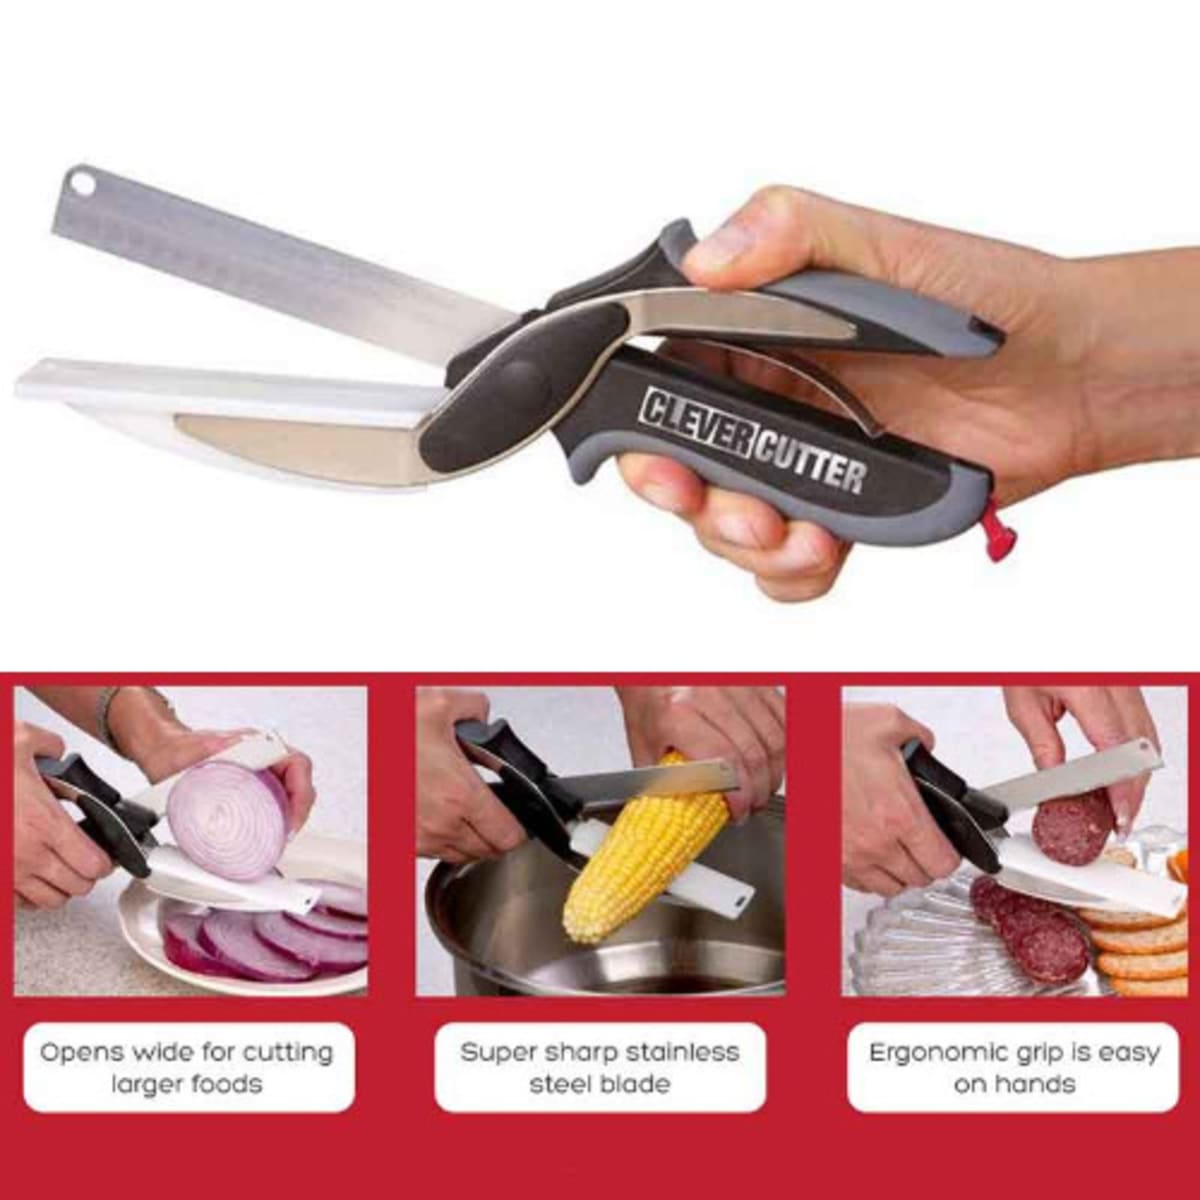 https://www-konga-com-res.cloudinary.com/w_400,f_auto,fl_lossy,dpr_3.0,q_auto/media/catalog/product/S/m/Smart-Cutter-2-in-1-Knife-And-Cutting-Board-7102366.jpg